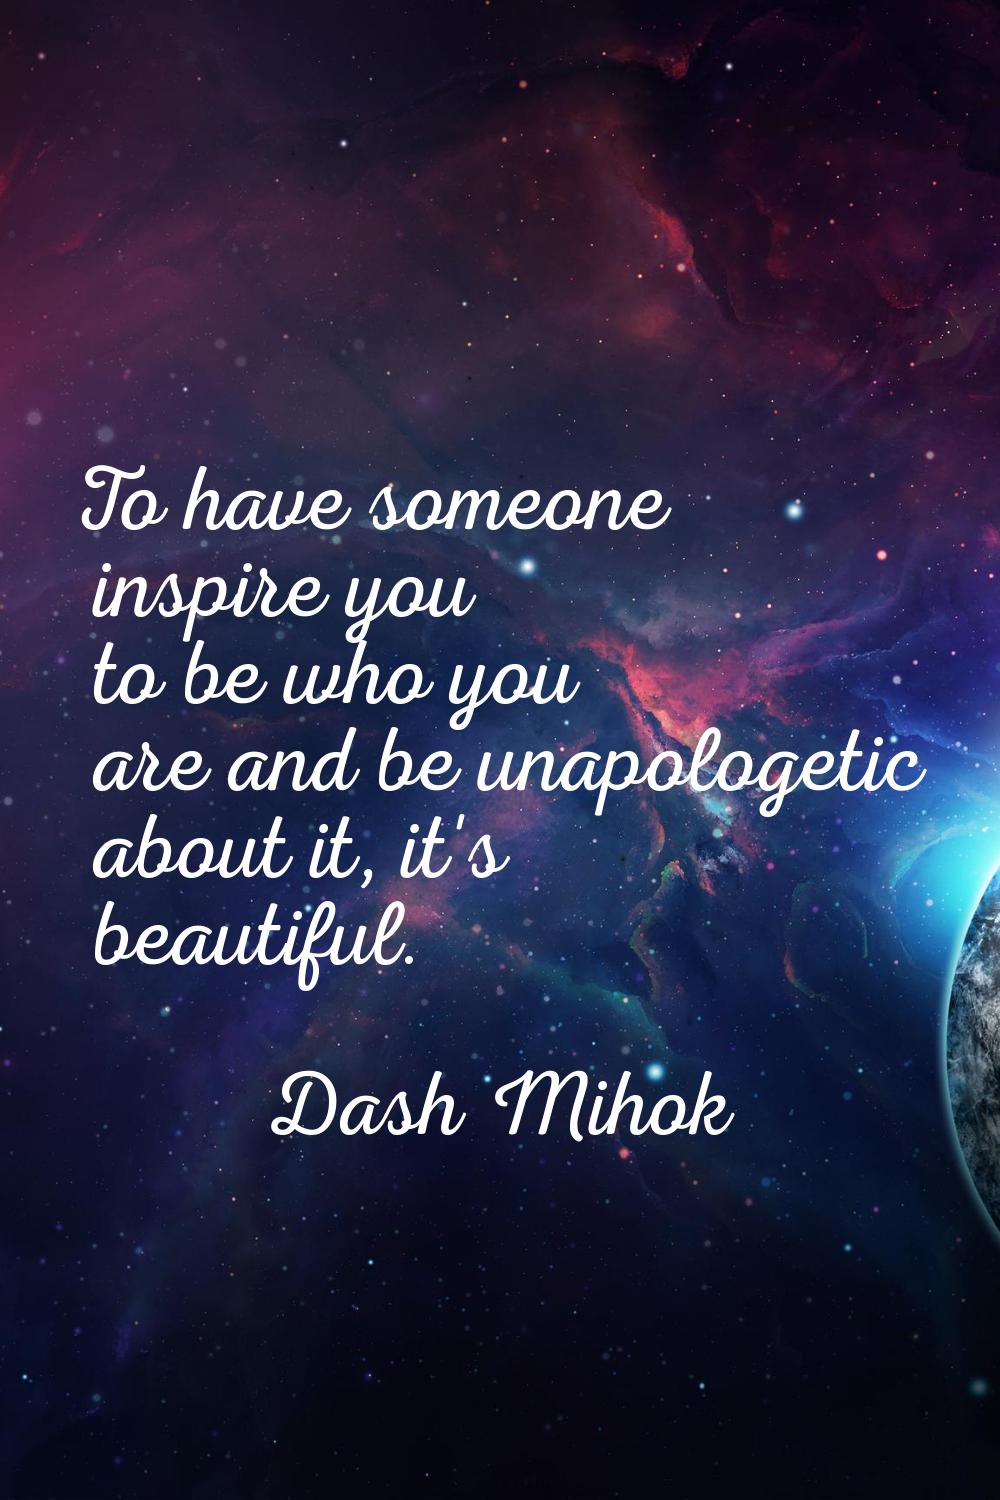 To have someone inspire you to be who you are and be unapologetic about it, it's beautiful.